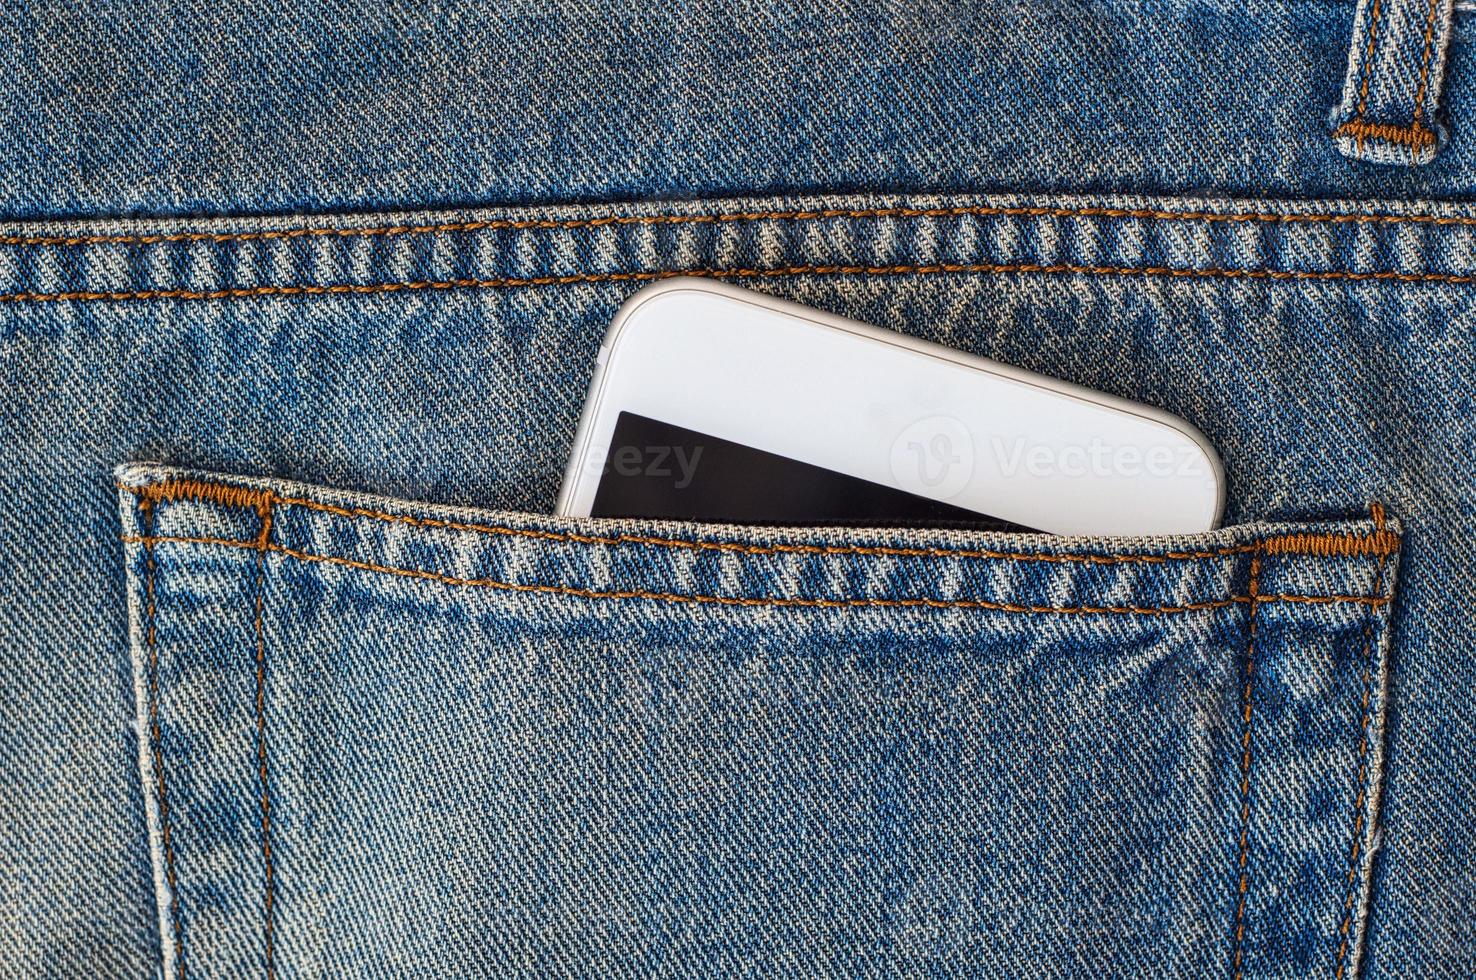 Smart phone in the back pocket of jeans photo